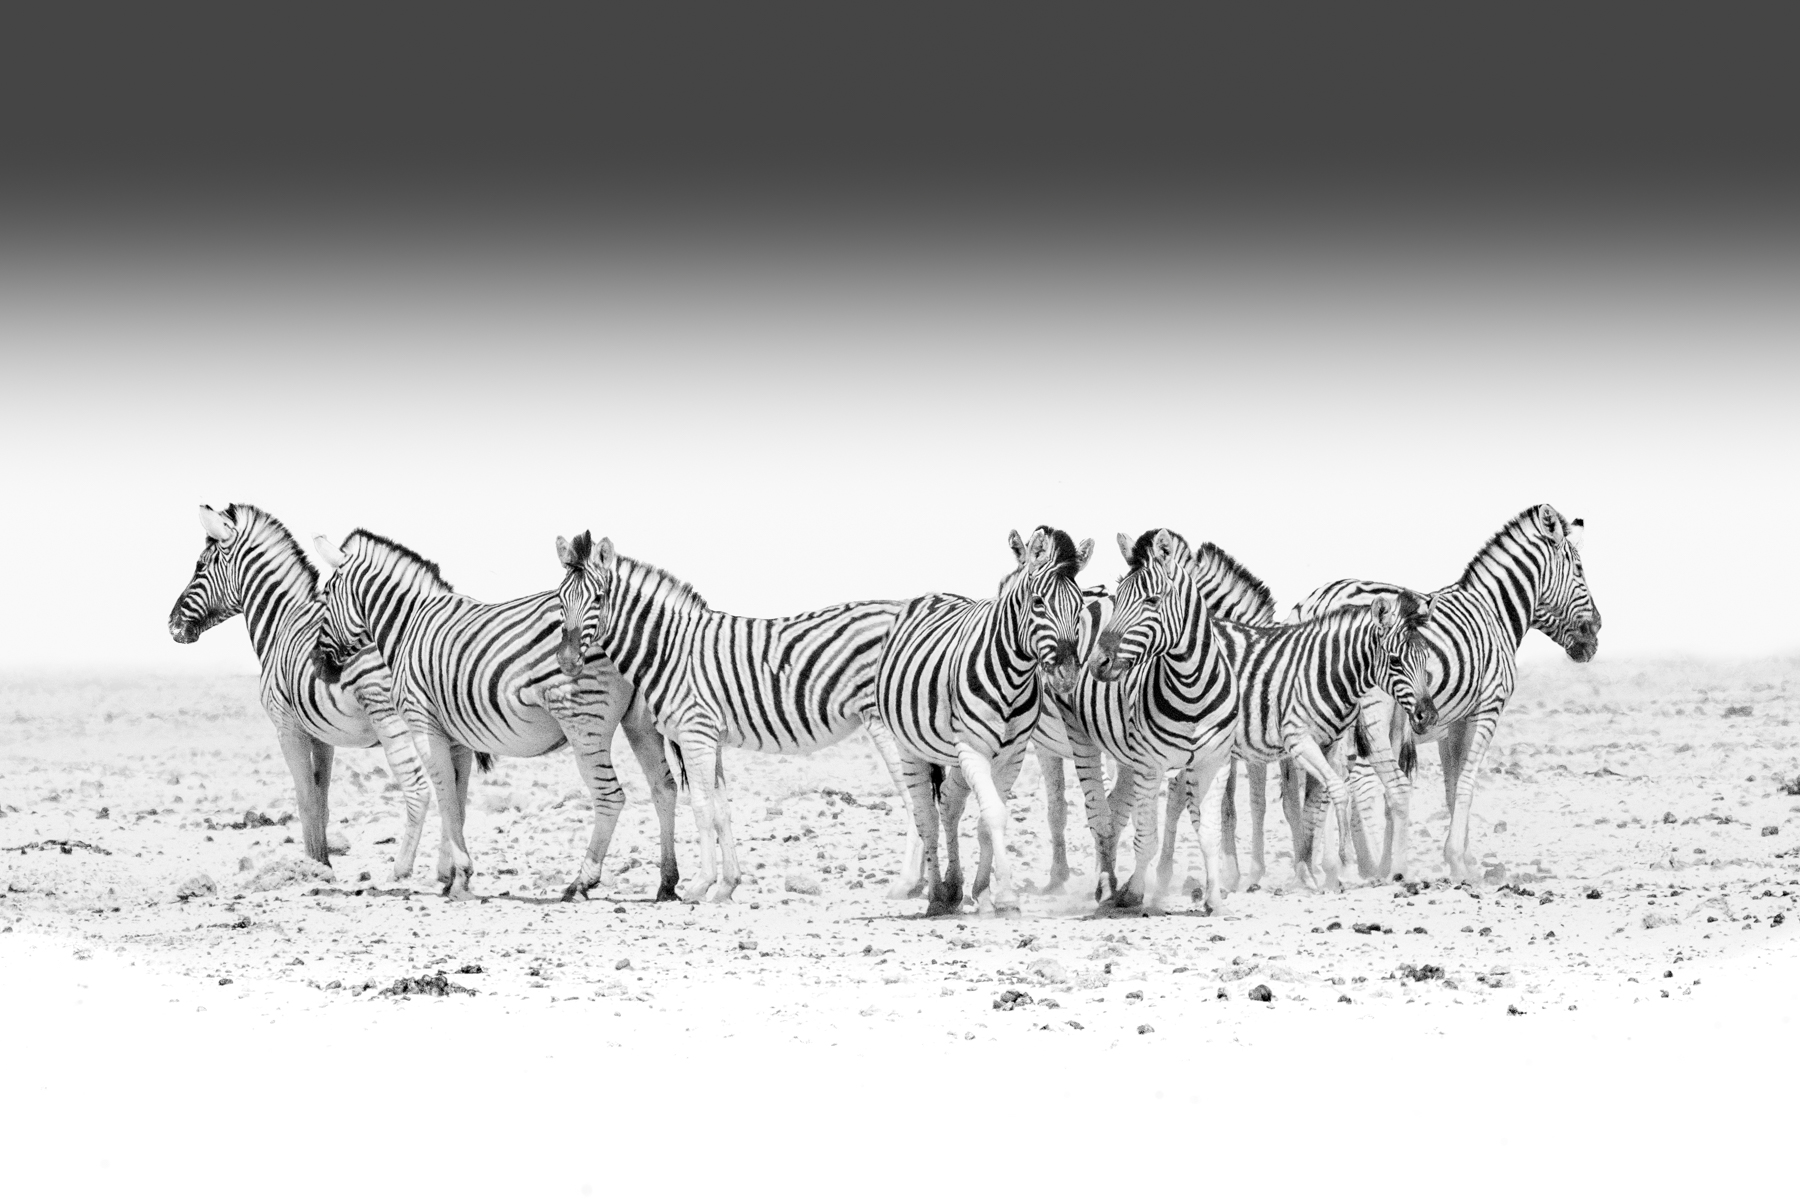 Zebras gather in the dust to wait their turn for a drink at the water hole